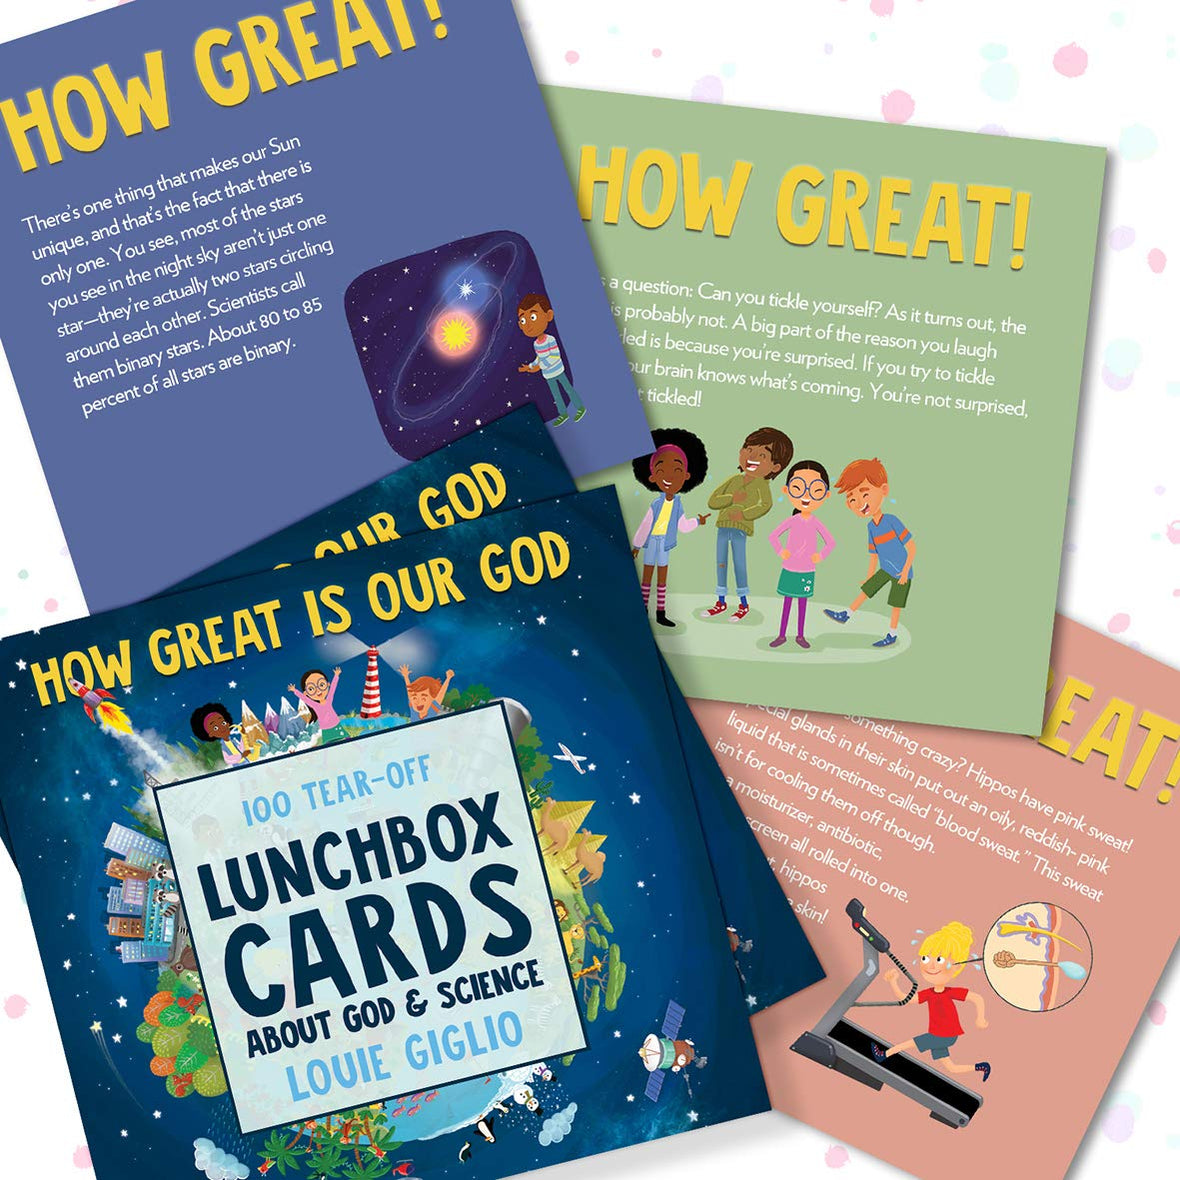 How Great Is Our God: 100 Tear-Off Lunchbox Cards About God and Science